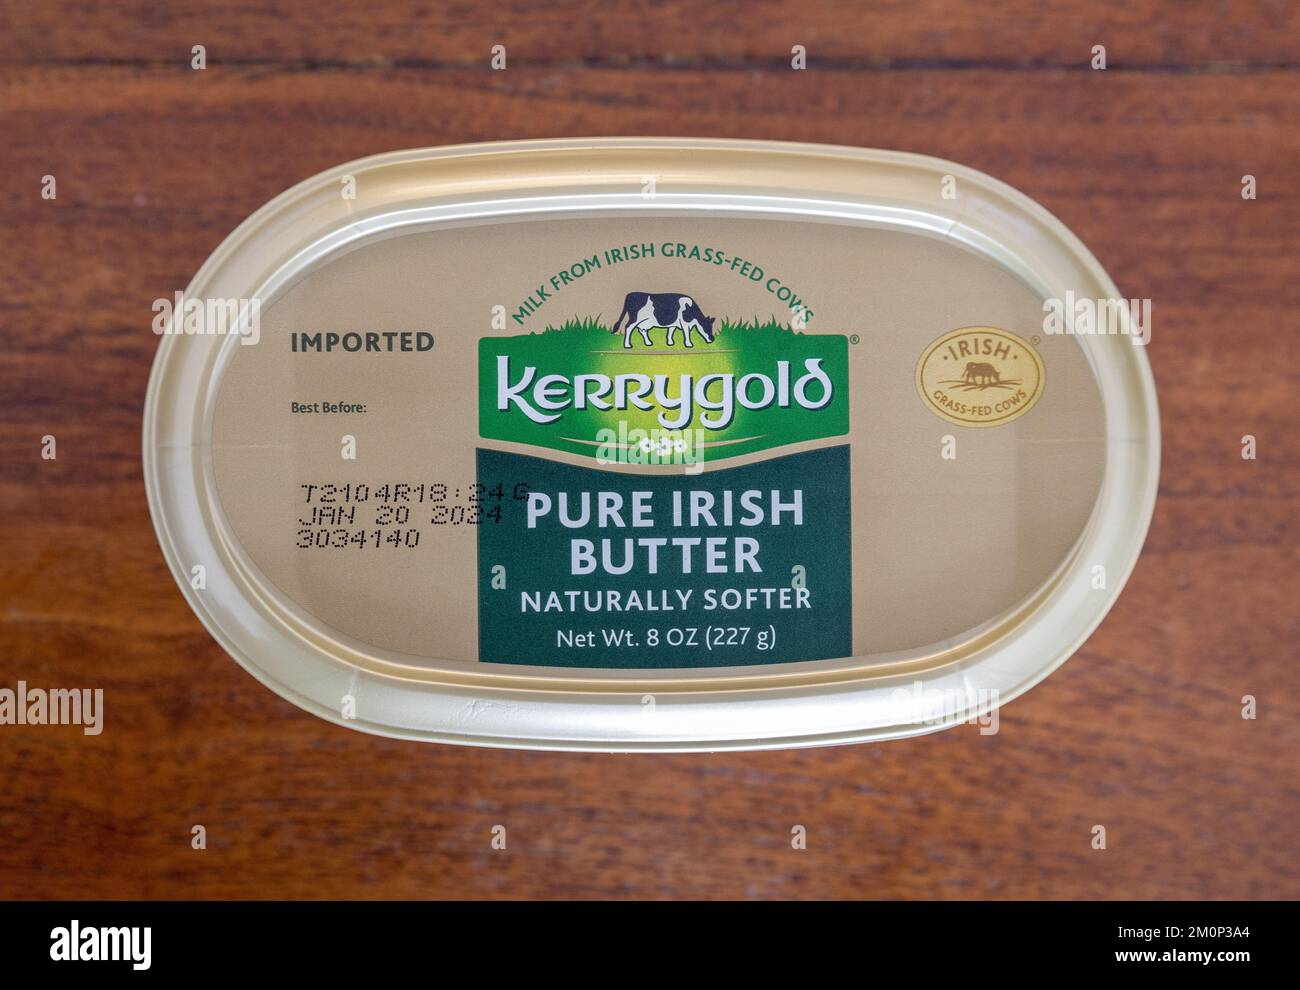 Imported Irish Kerrygold Soft Butter In A Plastic Tub American Packaging Naturally Softer Milk From Grass Fed Cows Stock Photo